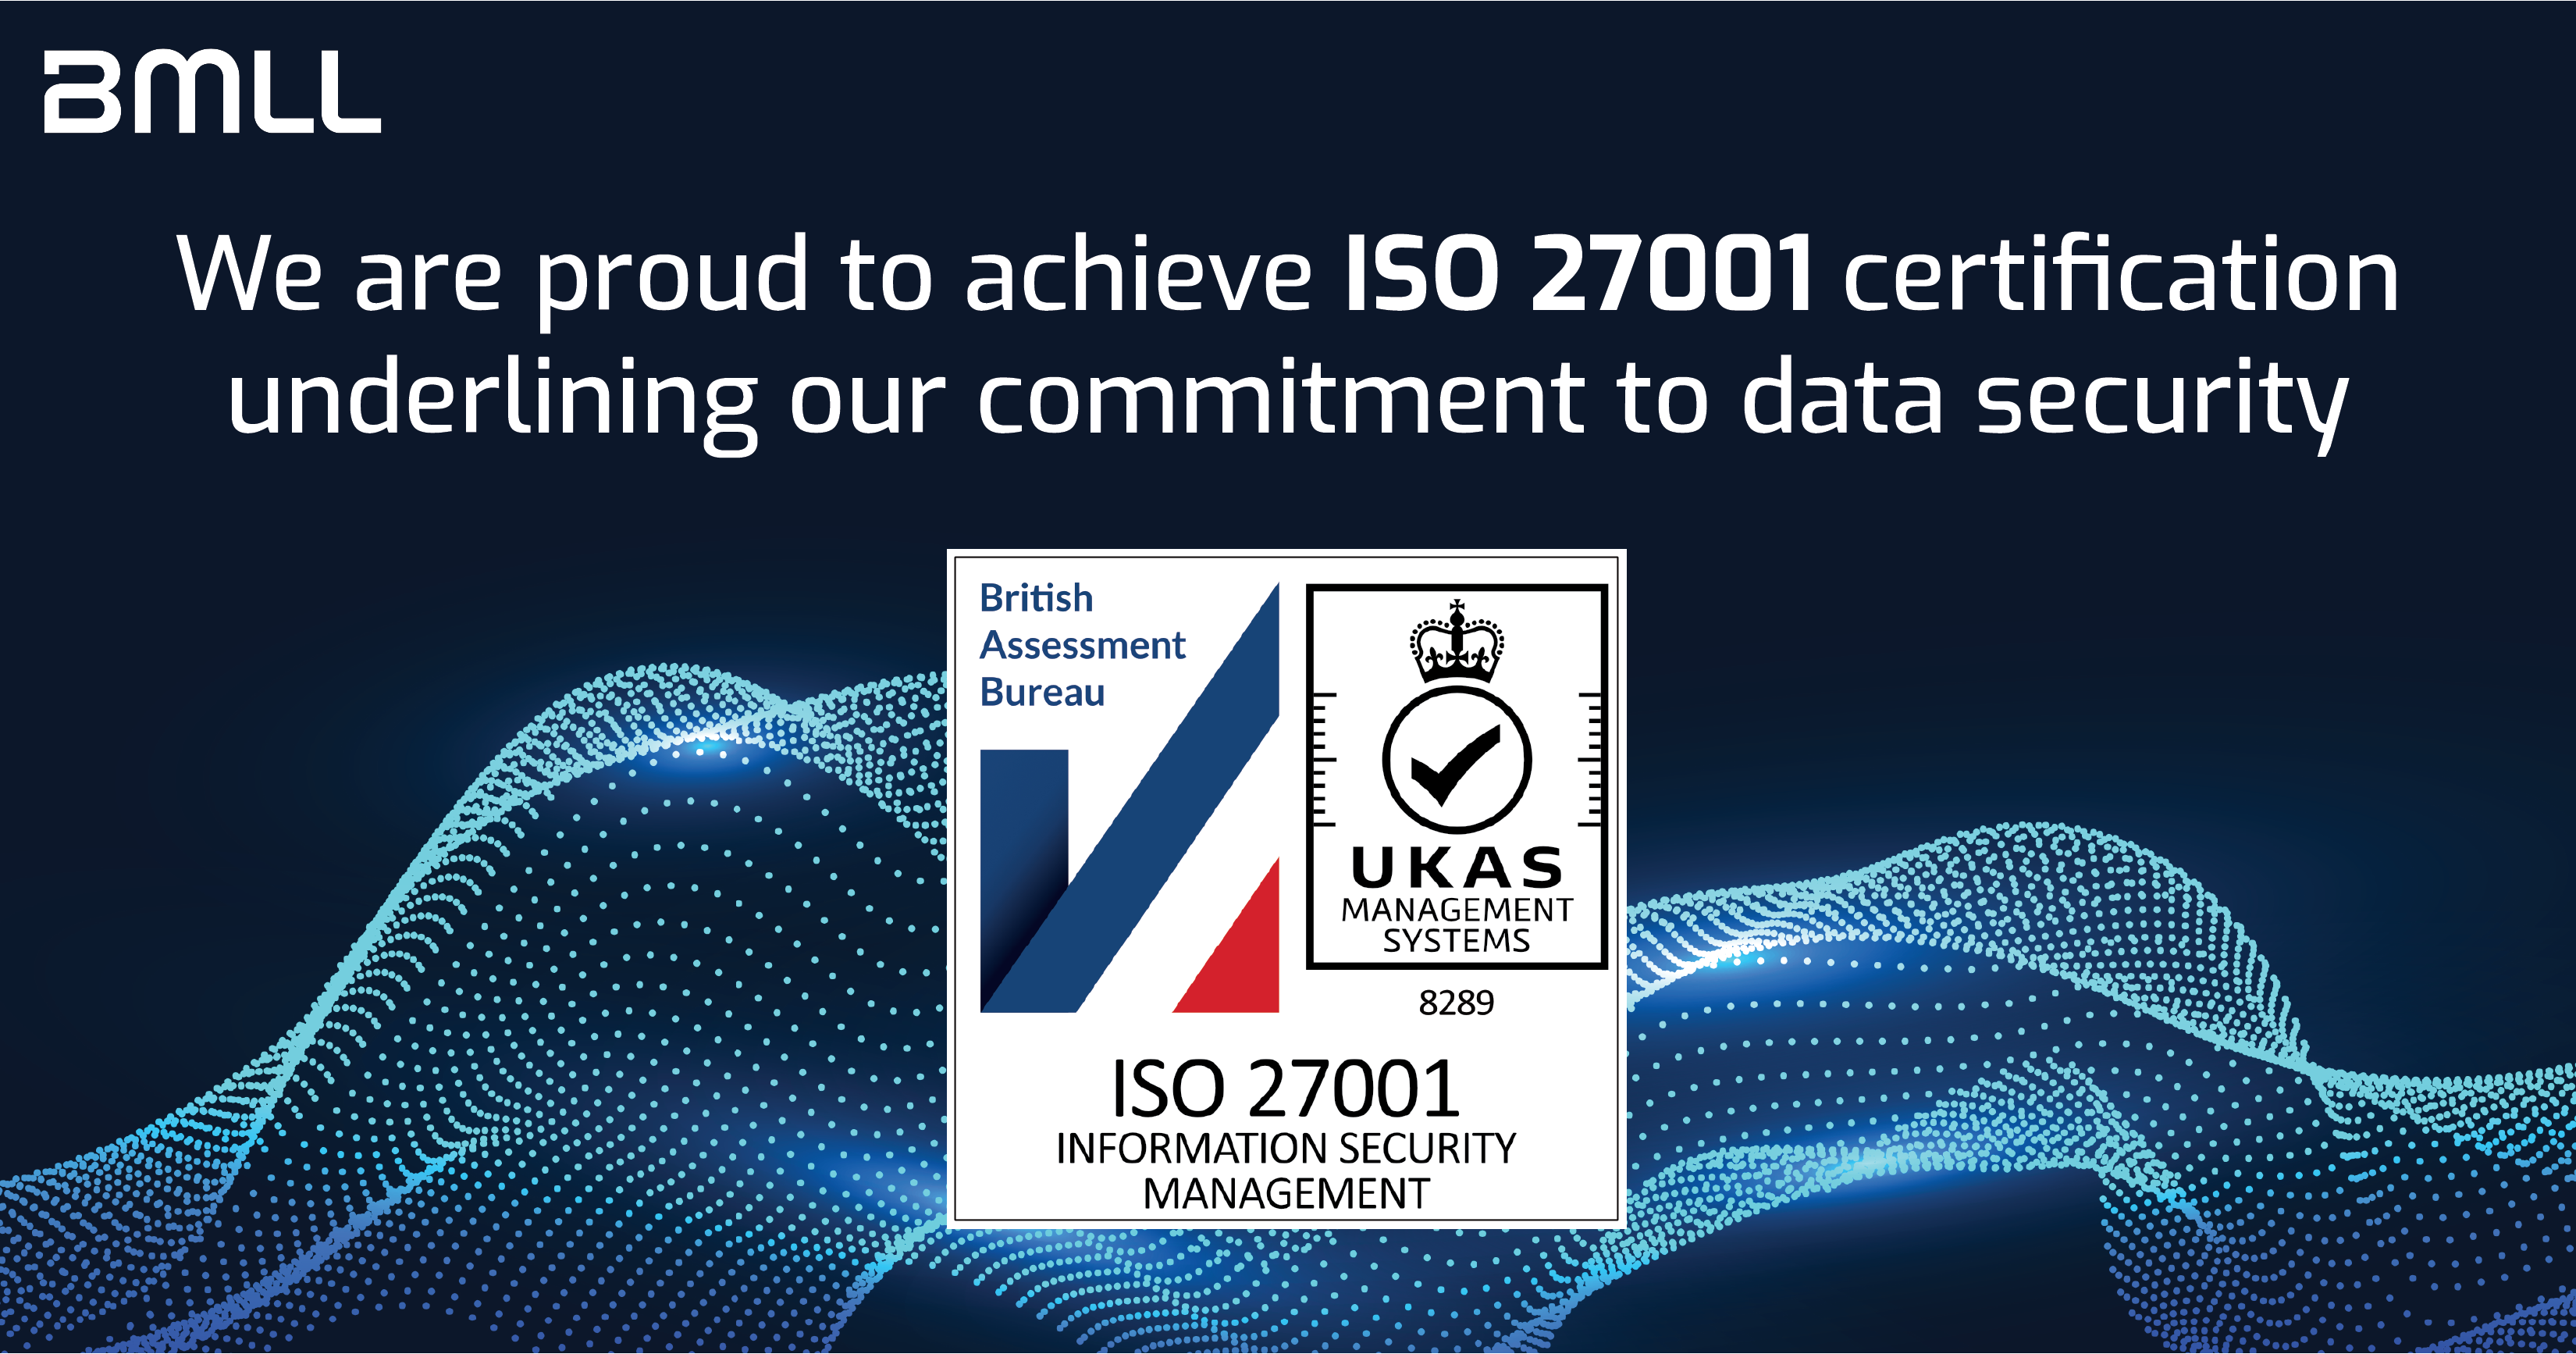 Photo for BMLL Awarded ISO 27001 Certification news story